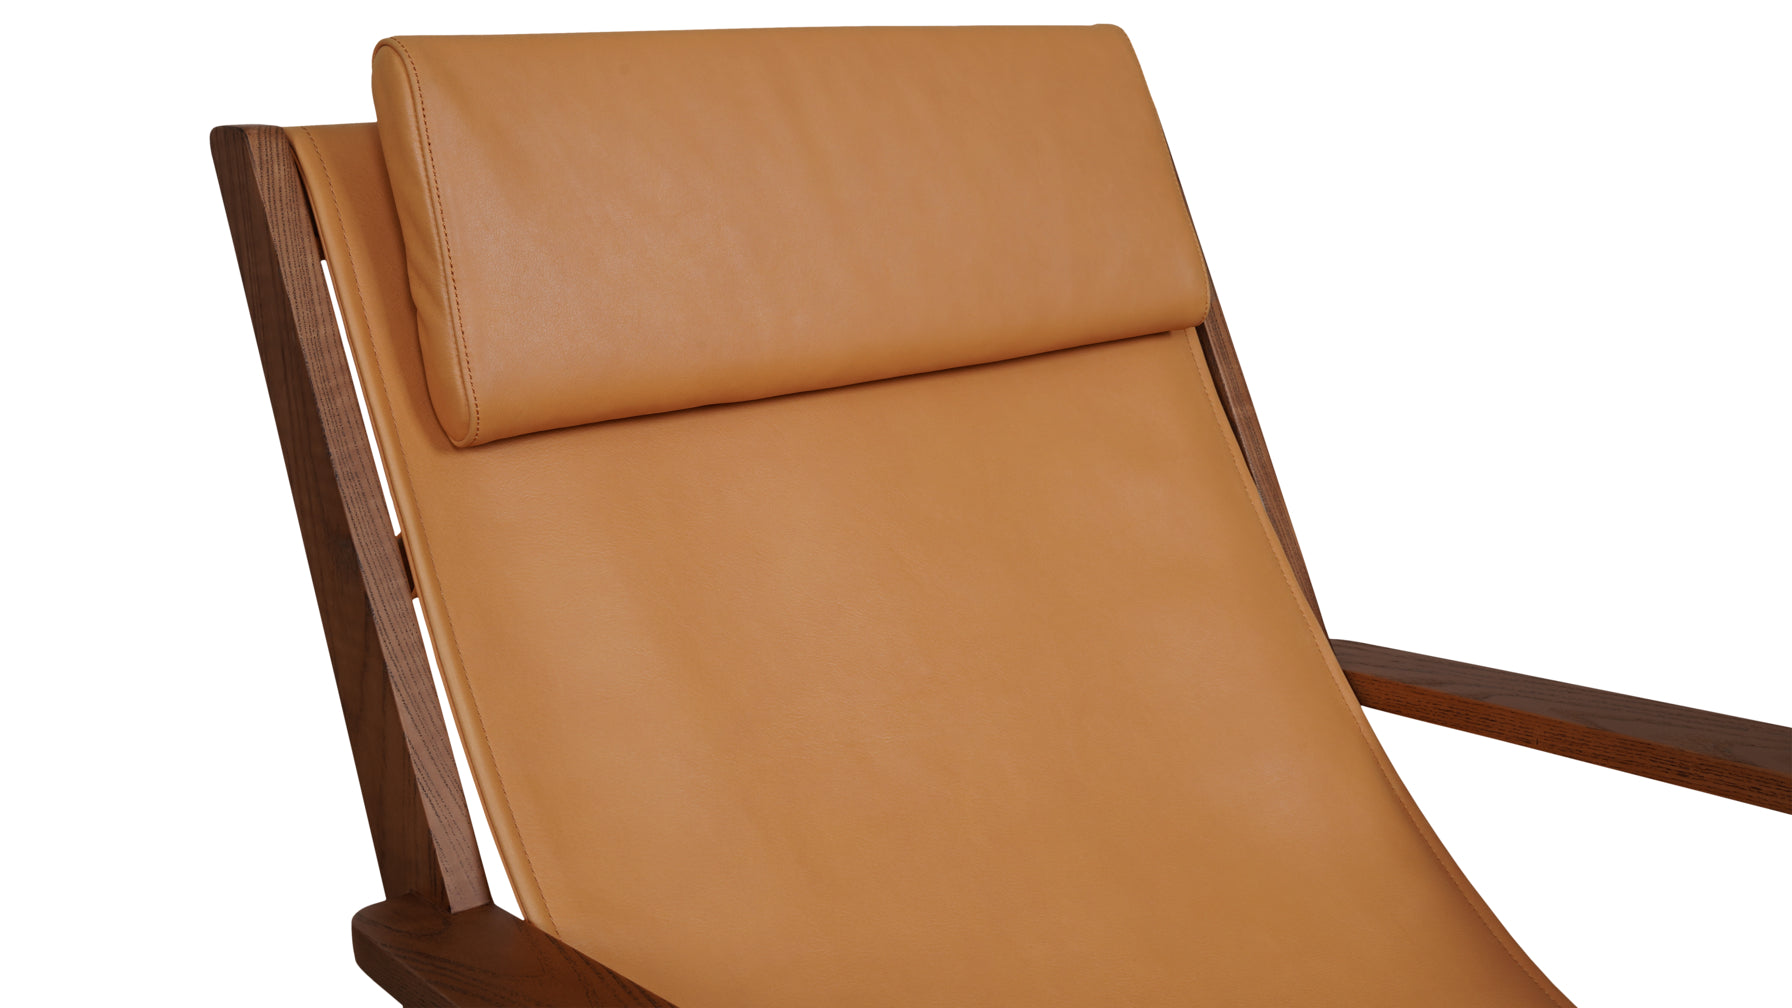 Sweet Life Sling Lounge Chair With Headrest, Terracotta Walnut - Image 7